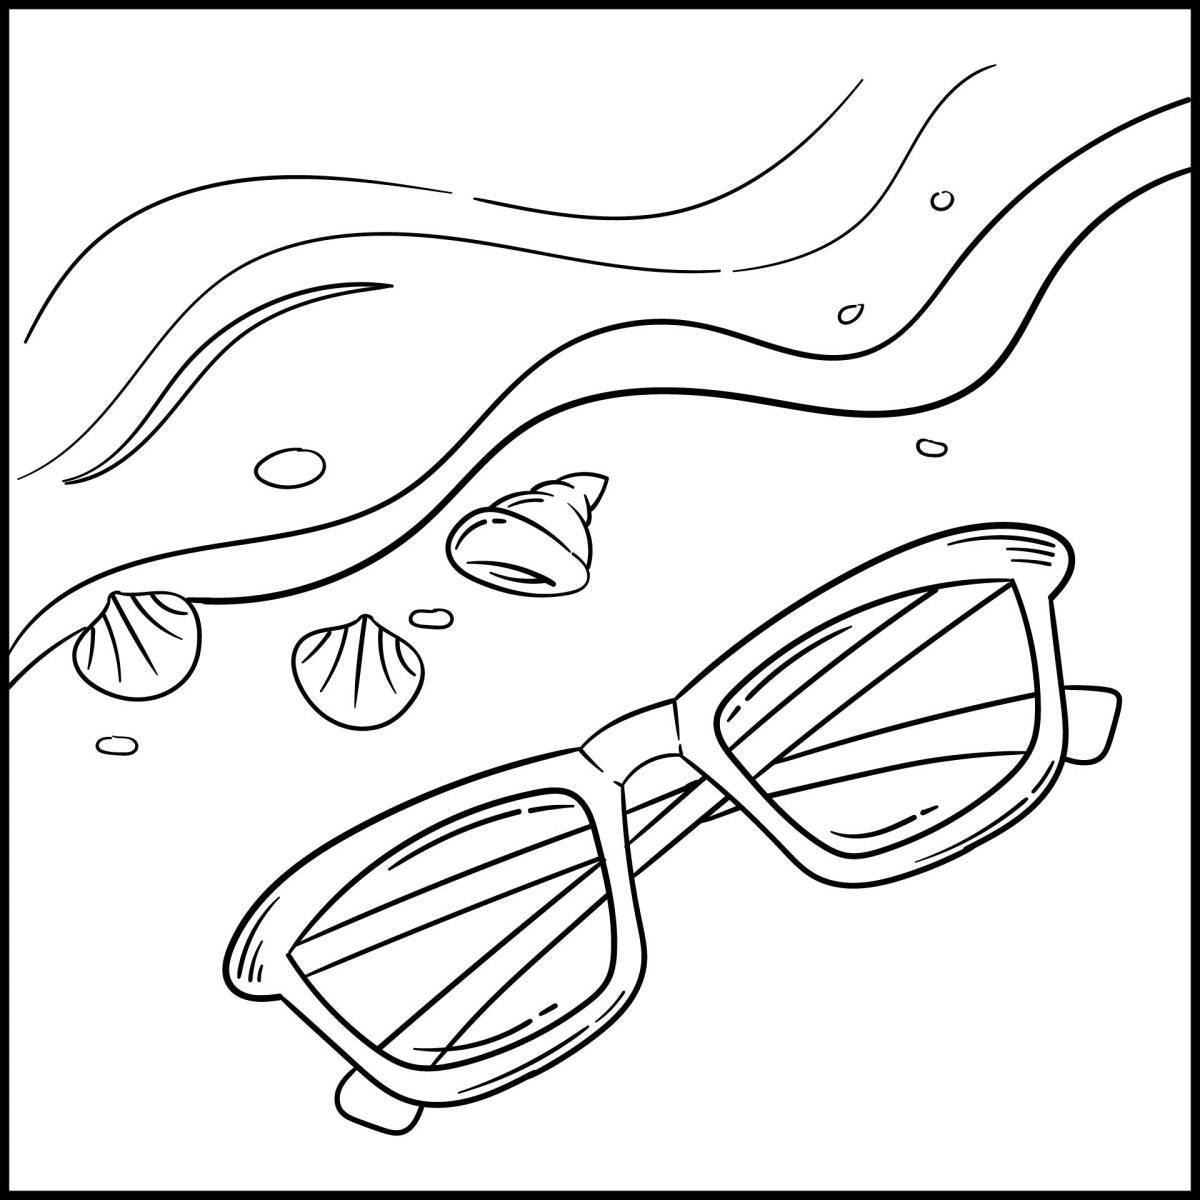 Adorable glasses for coloring